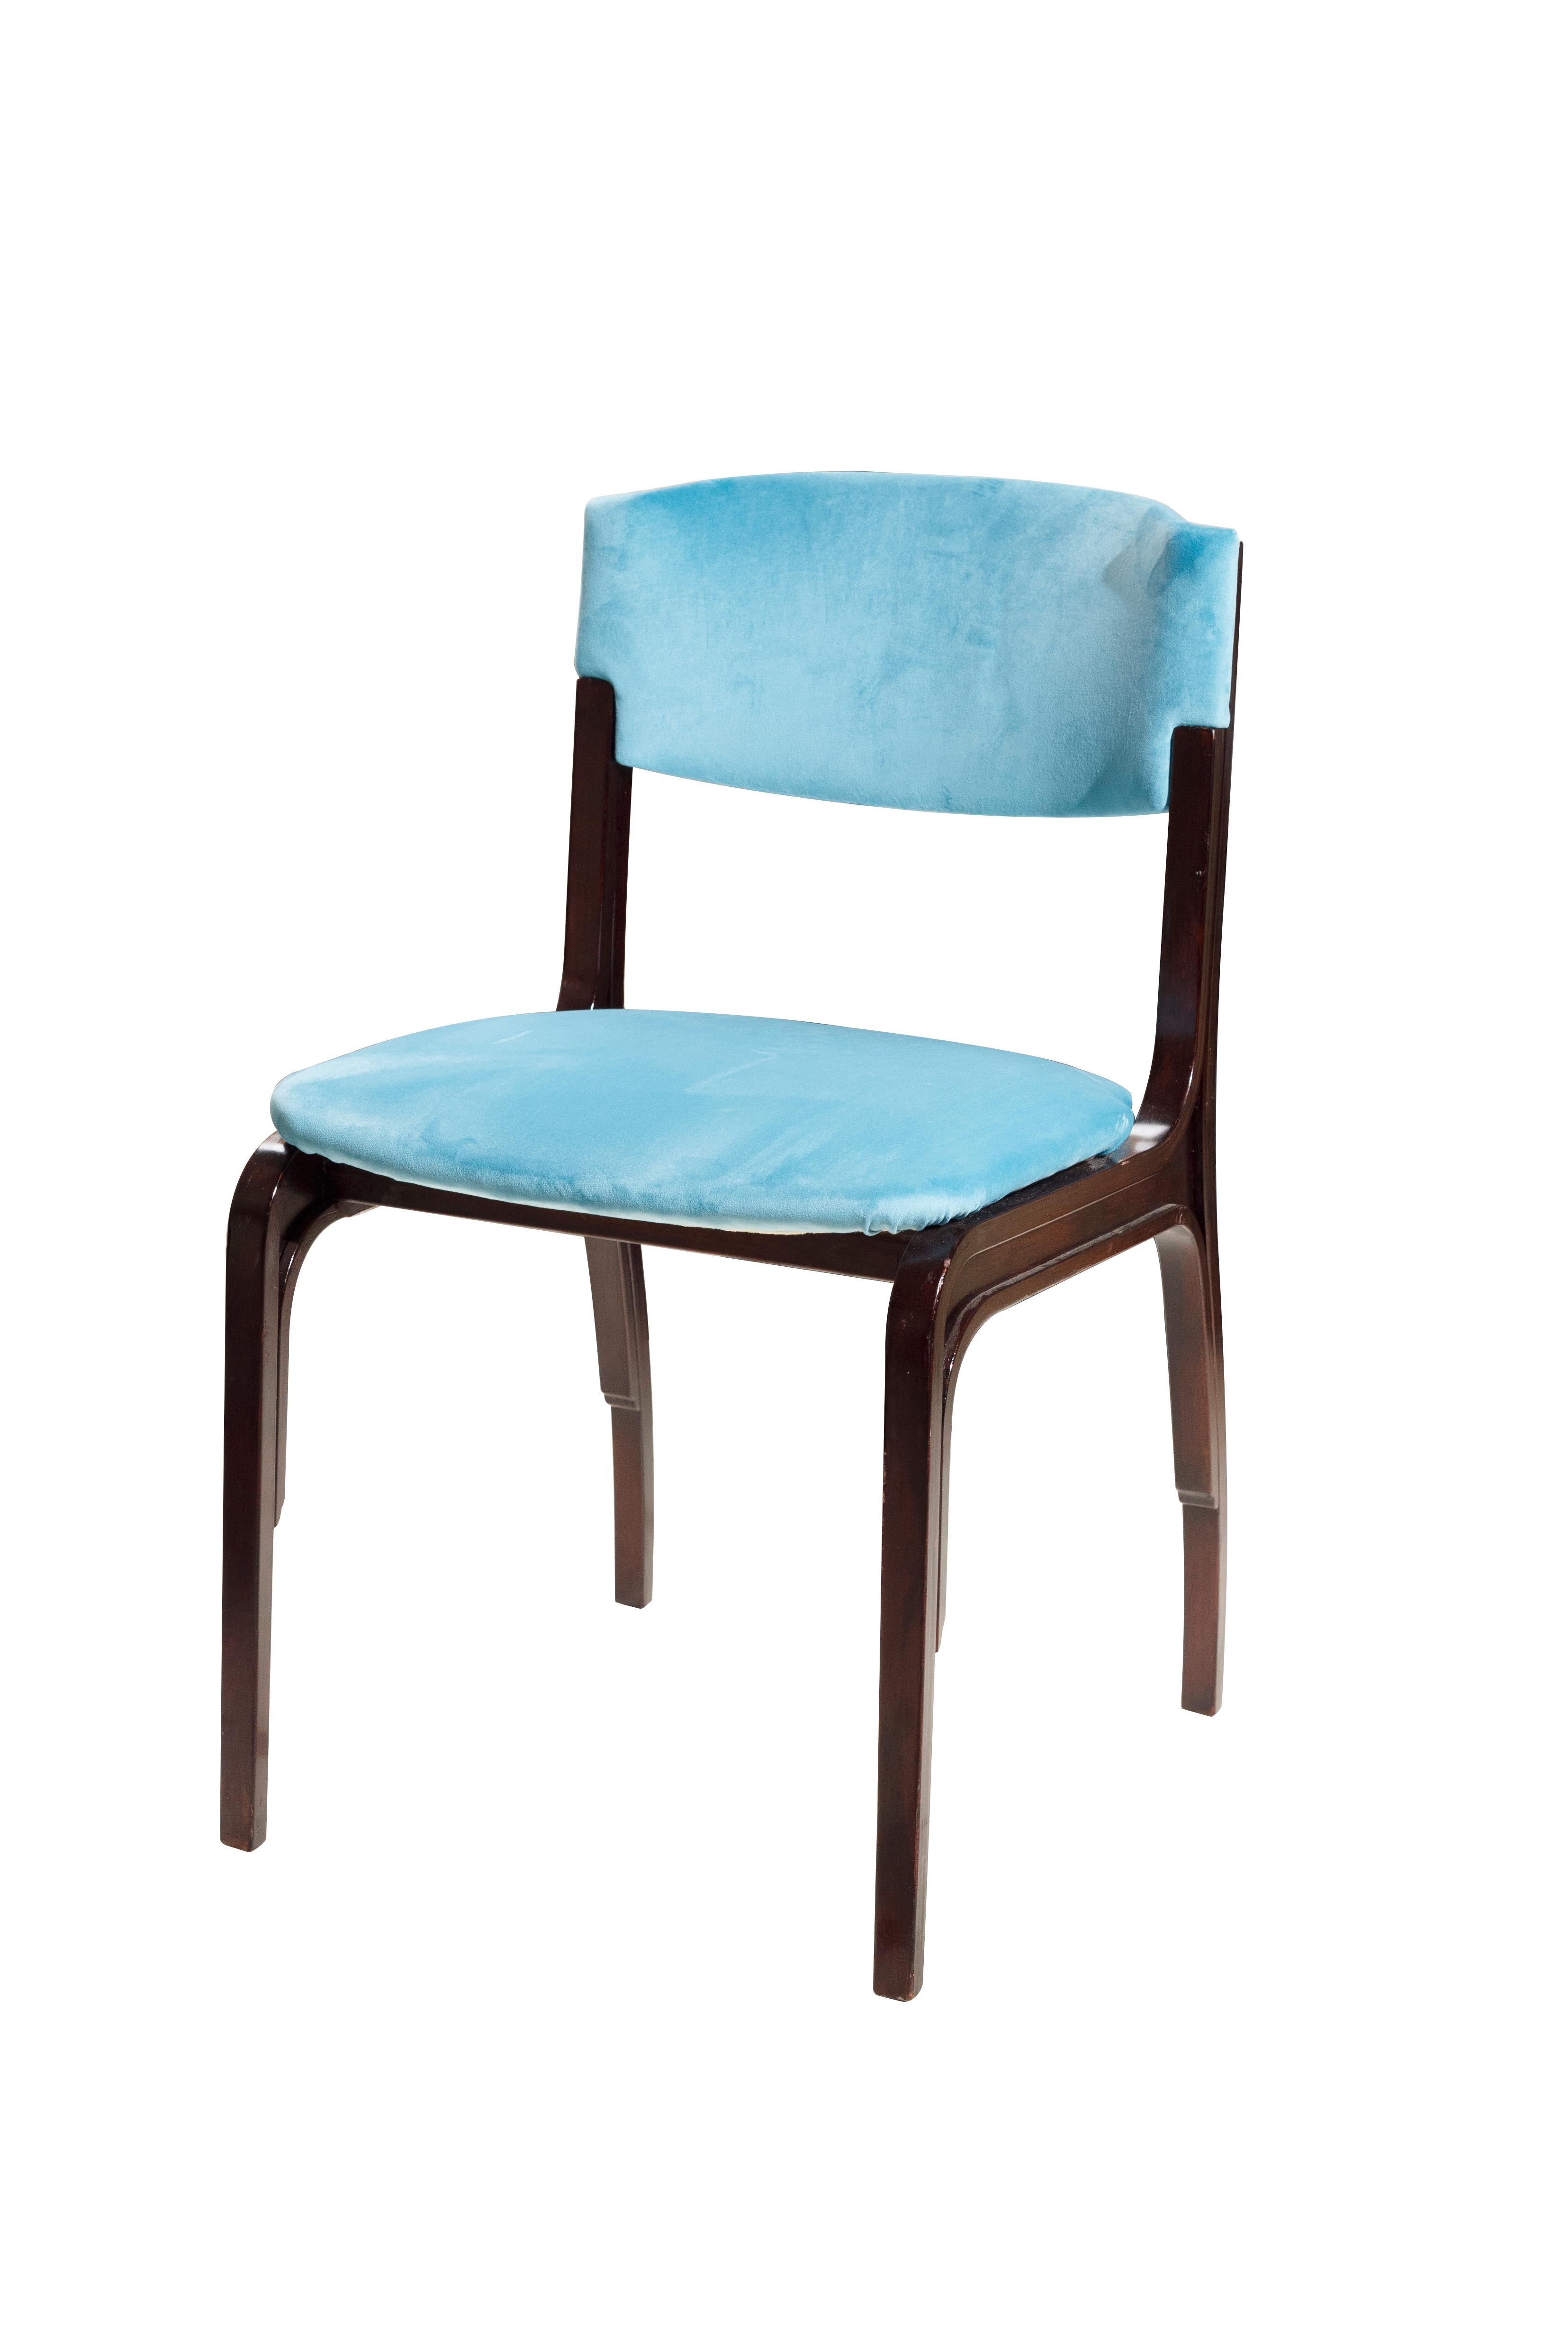 Gianfranco Frattini 5 blue velvet chairs Mid-Century Modern. Gianfranco Frattini is Italian architect and designer who studied at the school of Gio Ponti in Milan, following in his footsteps. generation that formed the design movement from